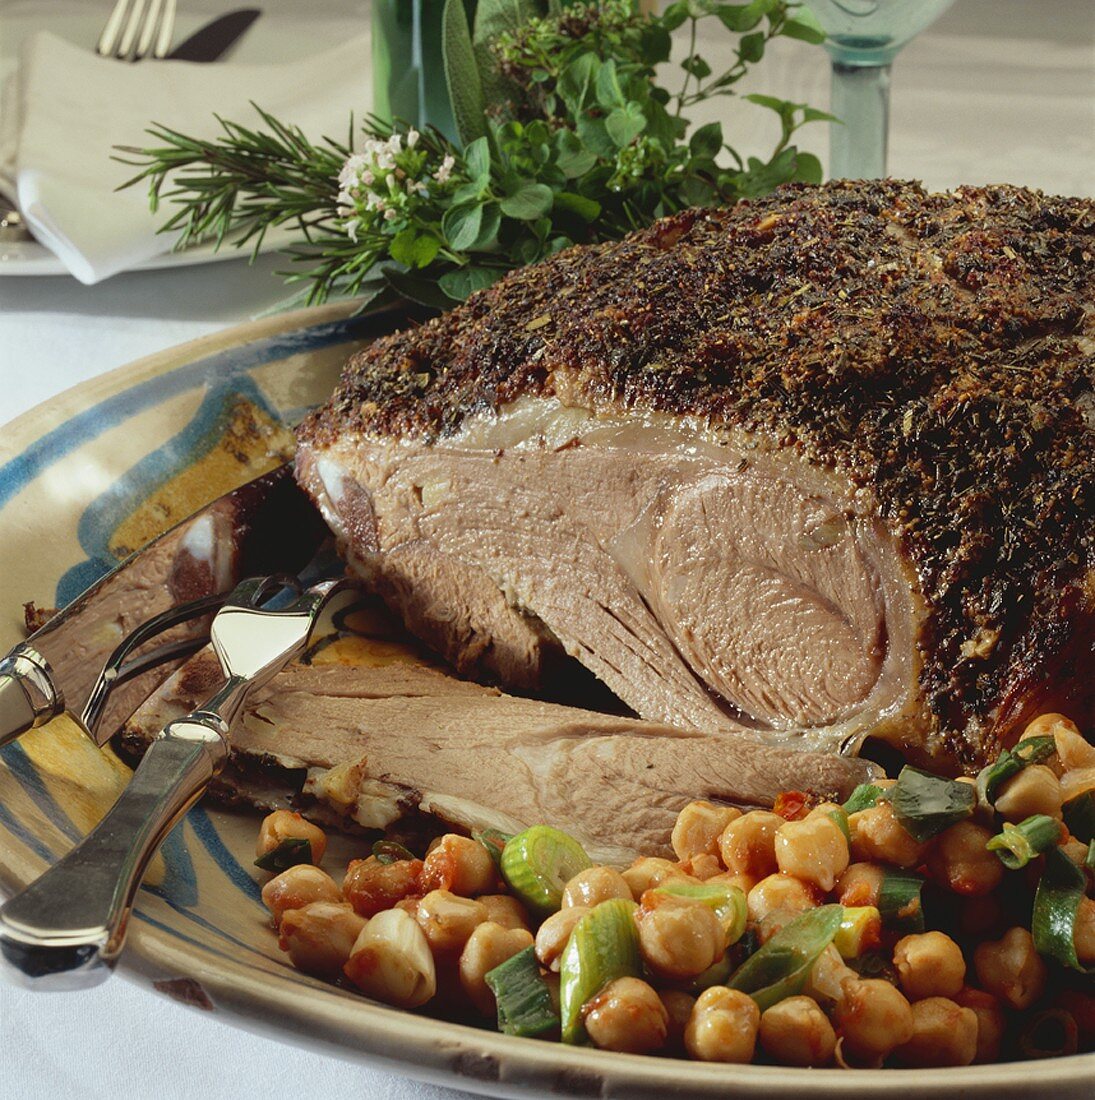 Leg of lamb with crust of herbs & seasonings and chick-peas